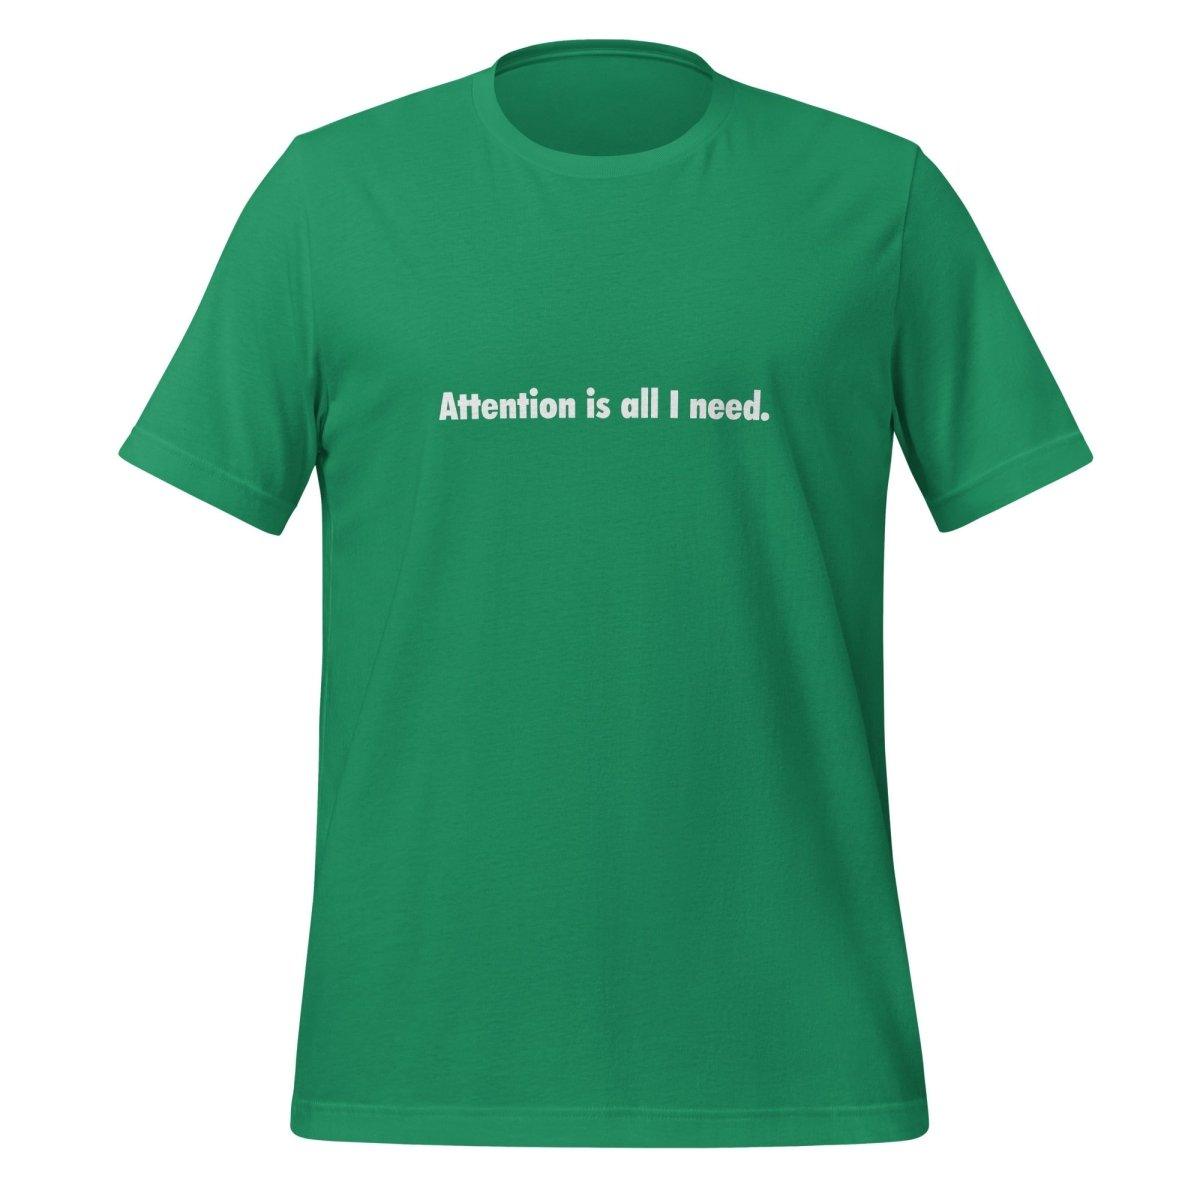 Attention is all I need. T - Shirt (unisex) - Kelly - AI Store